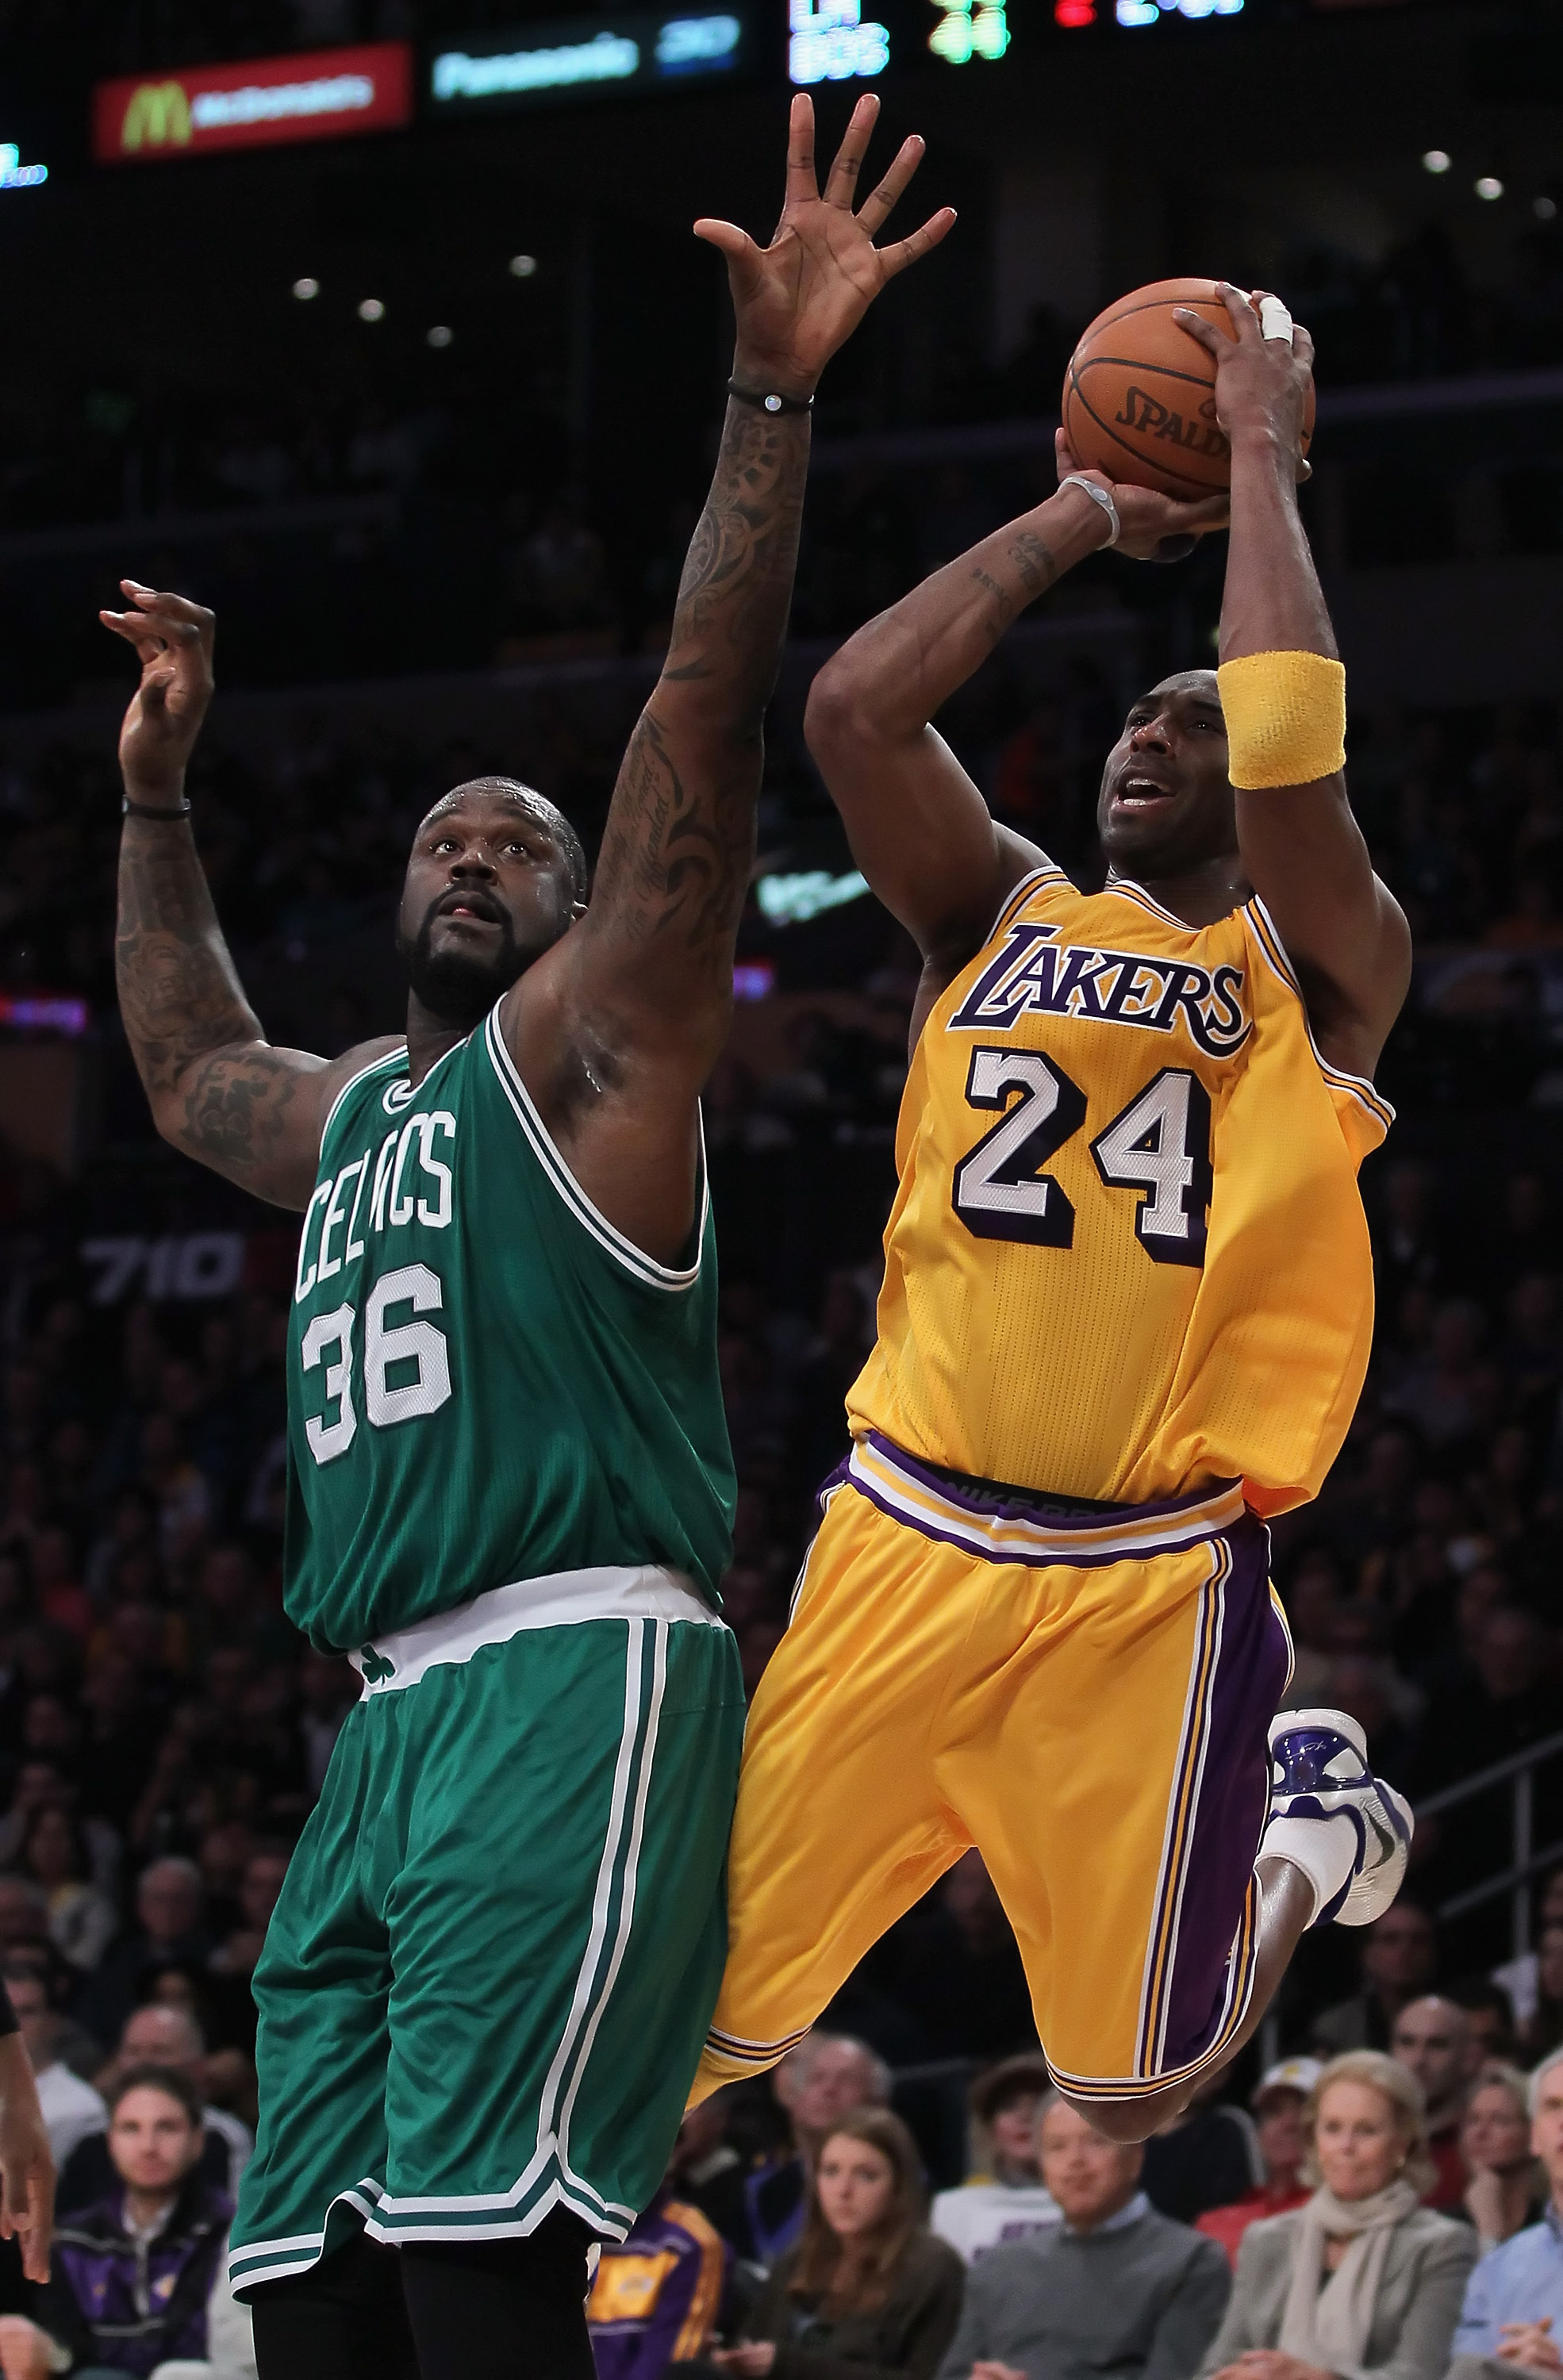 LOS ANGELES, CA - JANUARY 30:  Kobe Bryant #24 of the Los Angeles Lakers is fouled while shooting by Shaquille O'Neal #36 of the Boston Celtics in the first half at Staples Center on January 30, 2011 in Los Angeles, California.  (Photo by Jeff Gross/Getty